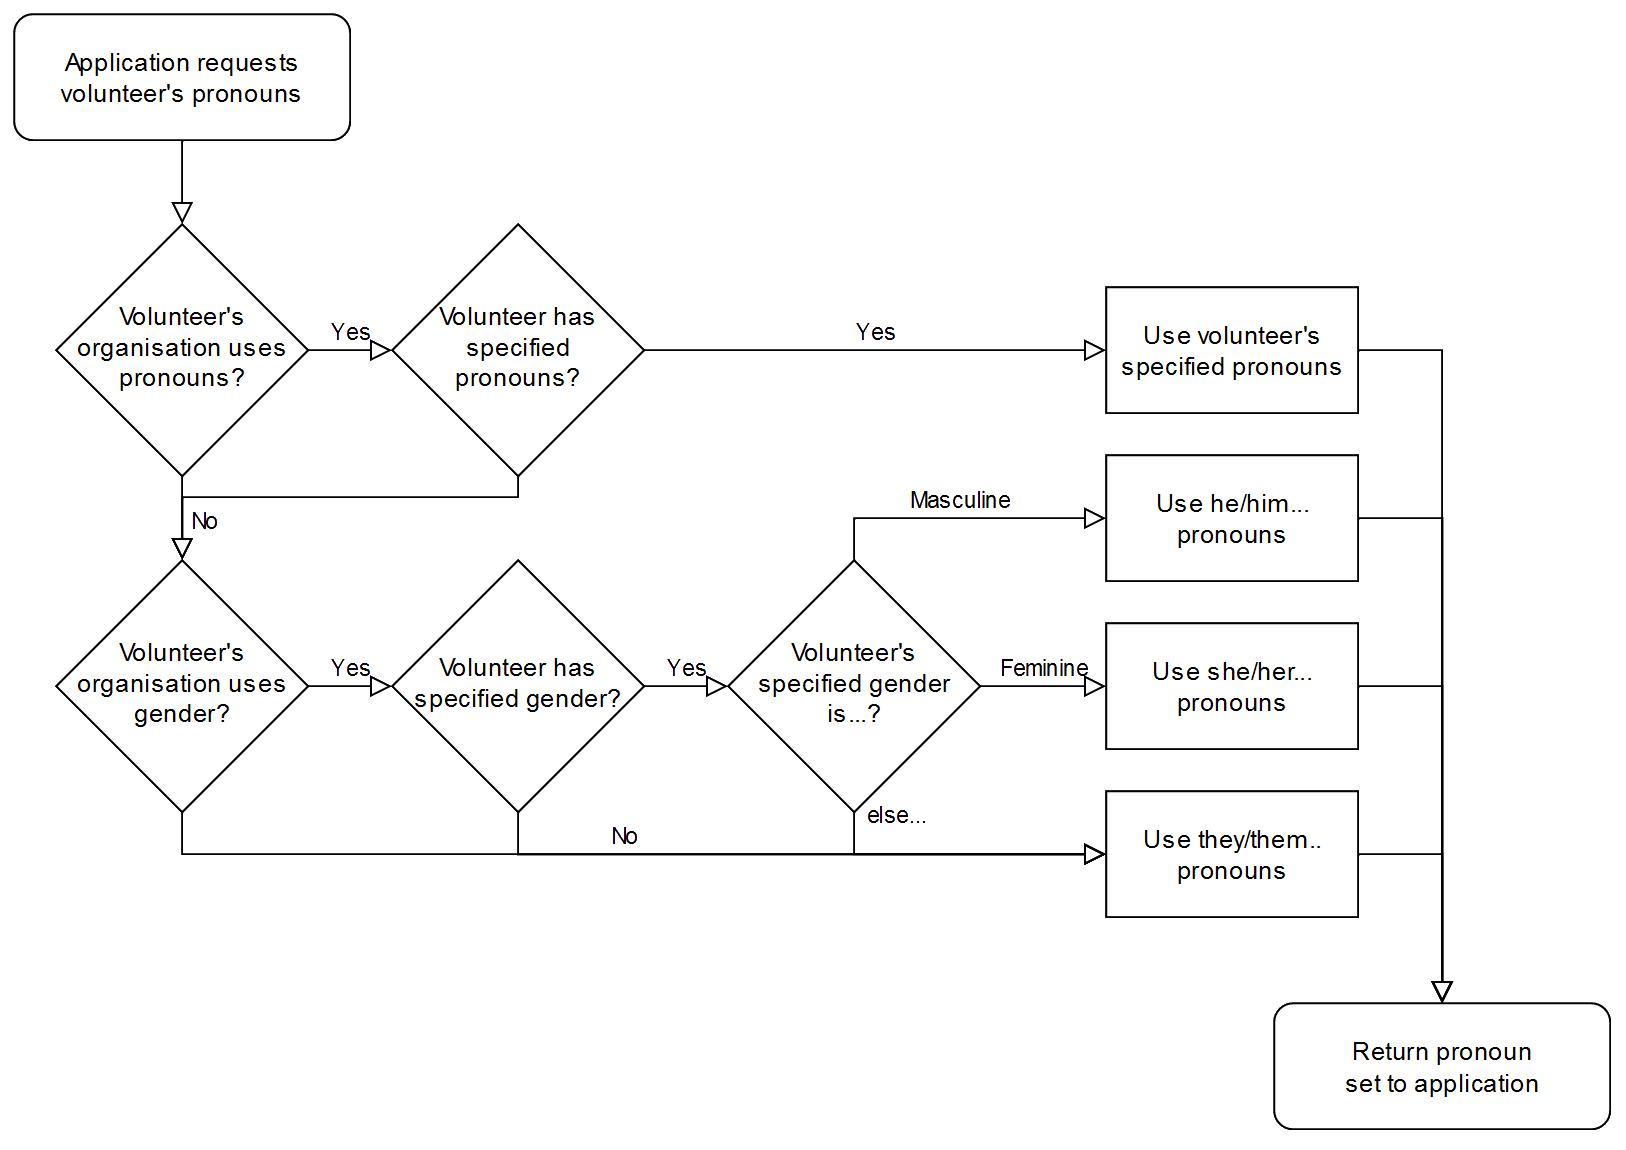 Flowchart showing how the pronouns used by Three Rings for a volunteer are contingent on what properties their org records, whether the volunteer has specified pronouns, failing that whether they've specified a gender, falling back to "singular they" pronouns.